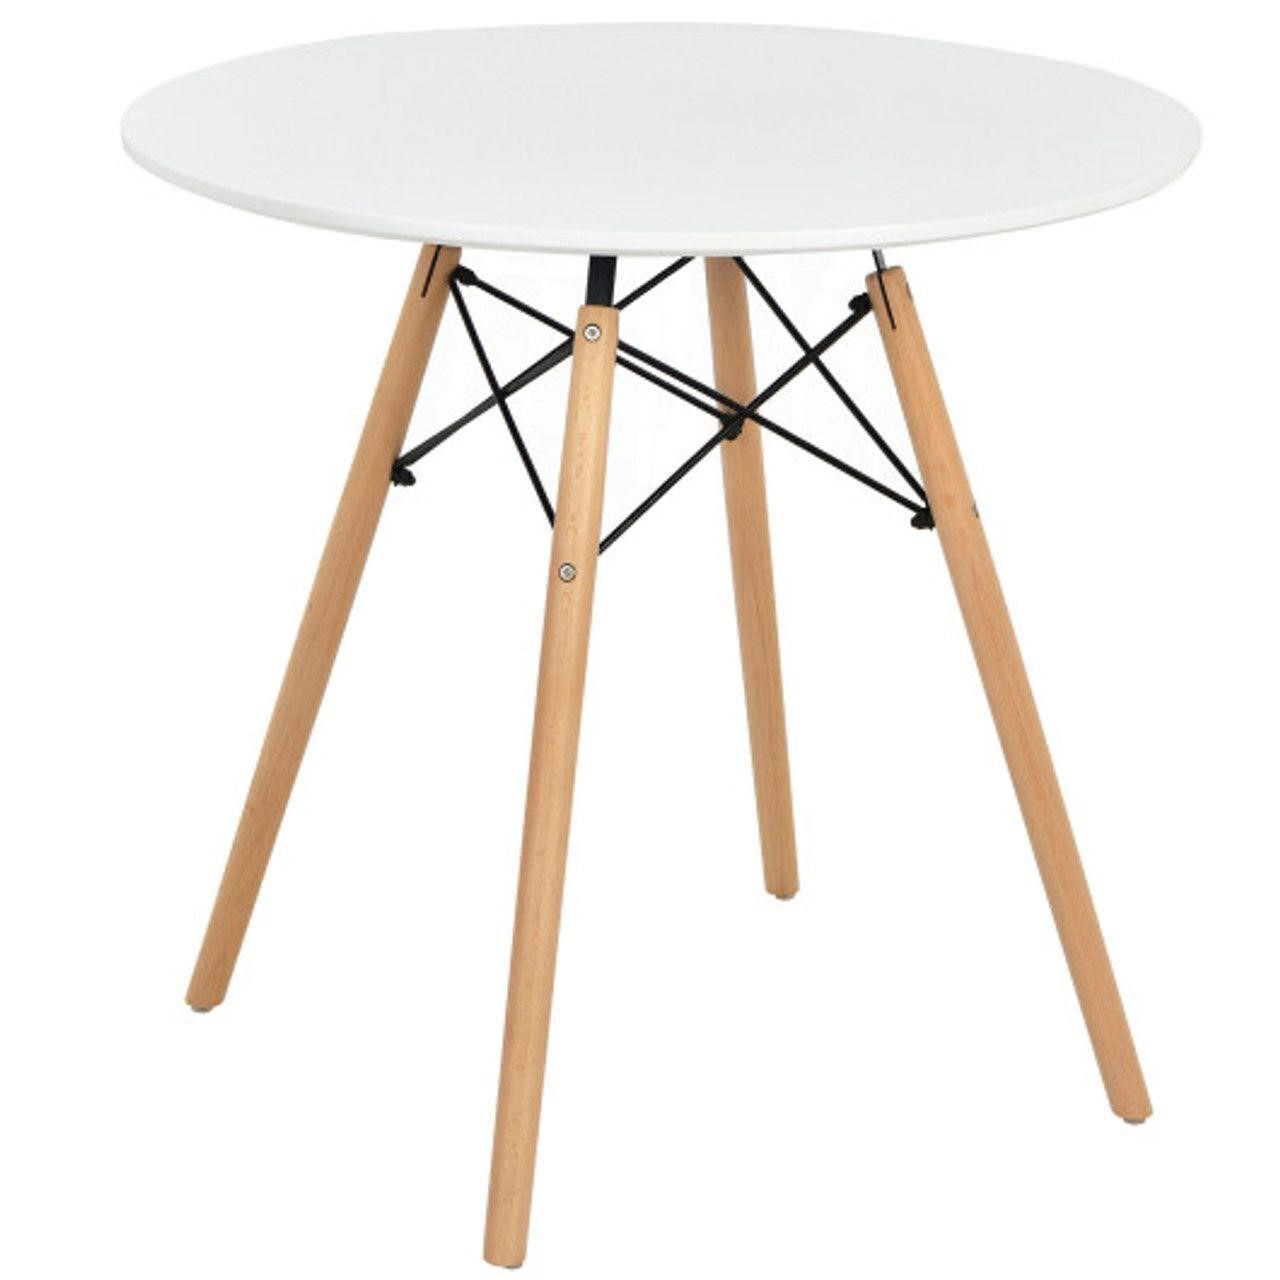 *Round Modern Dining Table With Solid Wooden Leg-W